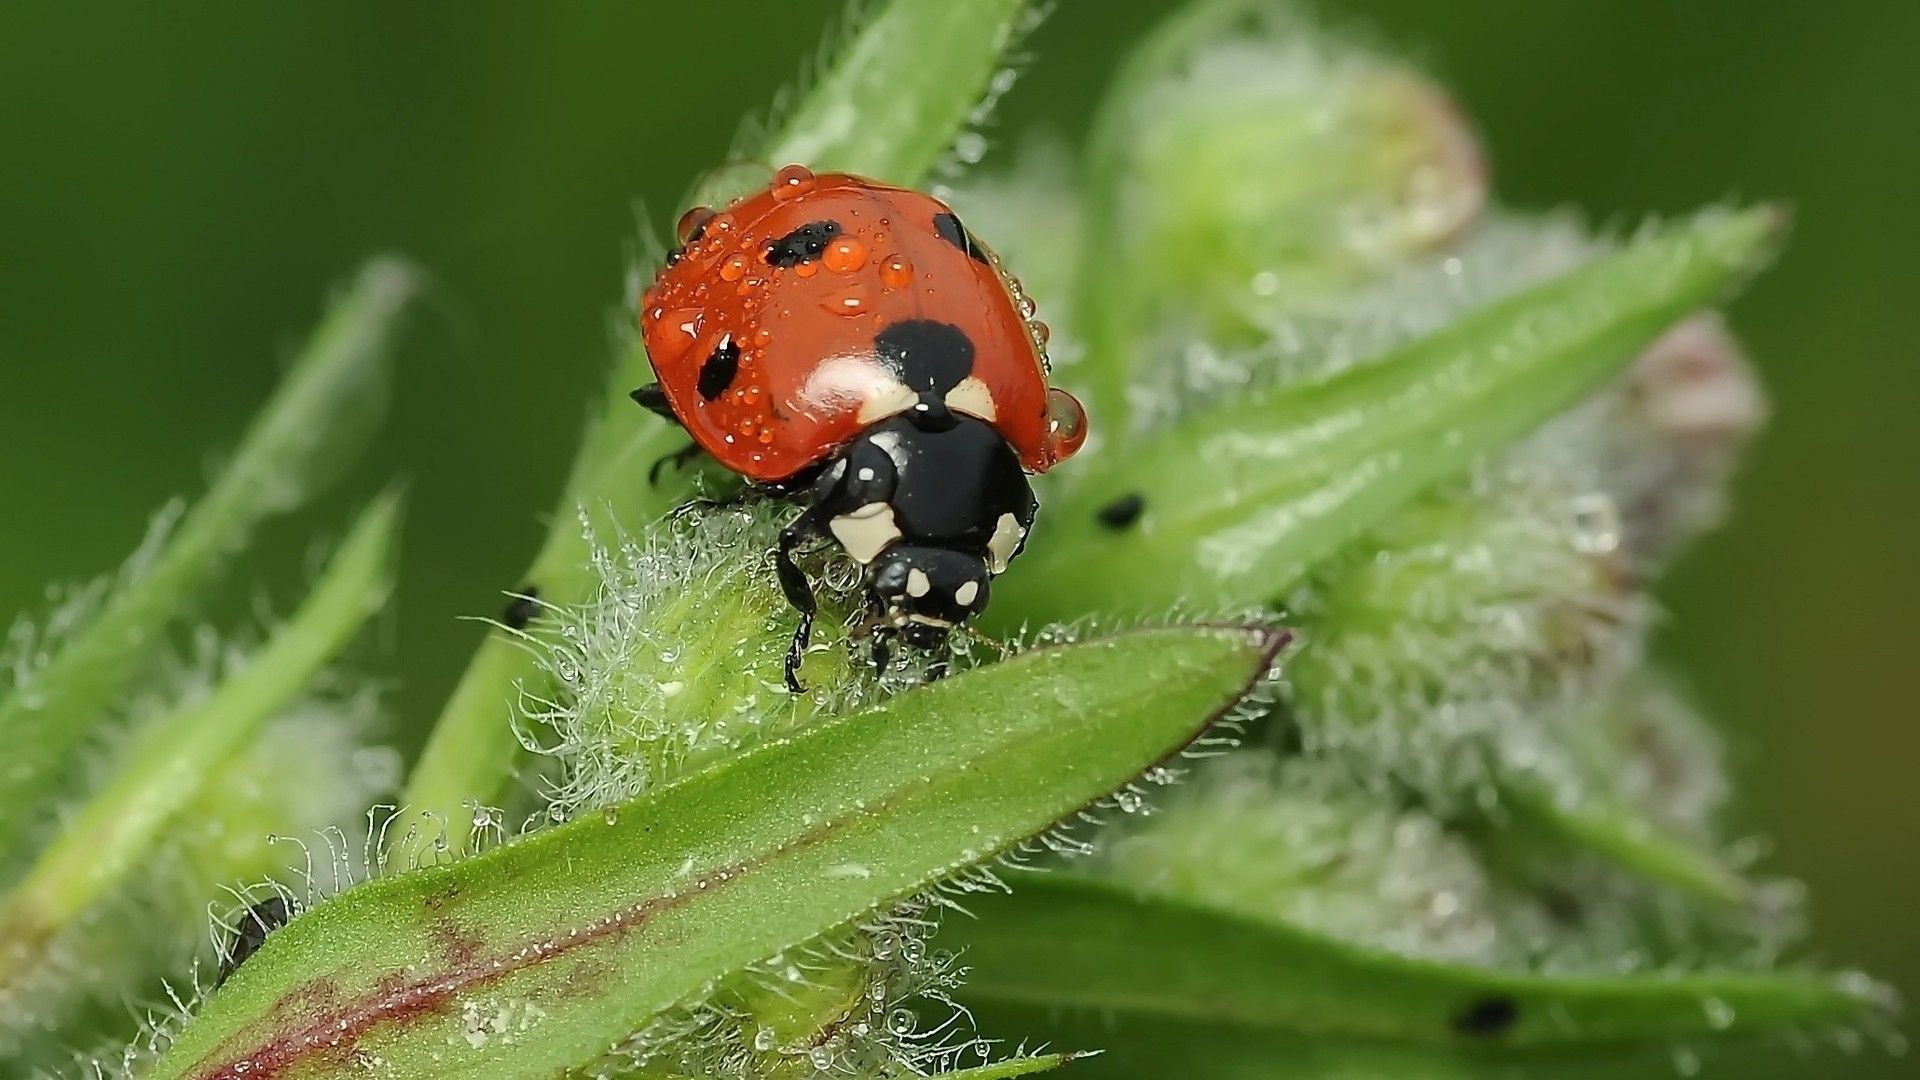 Lady Bug Insect in Monsoon Season | HD Wallpapers